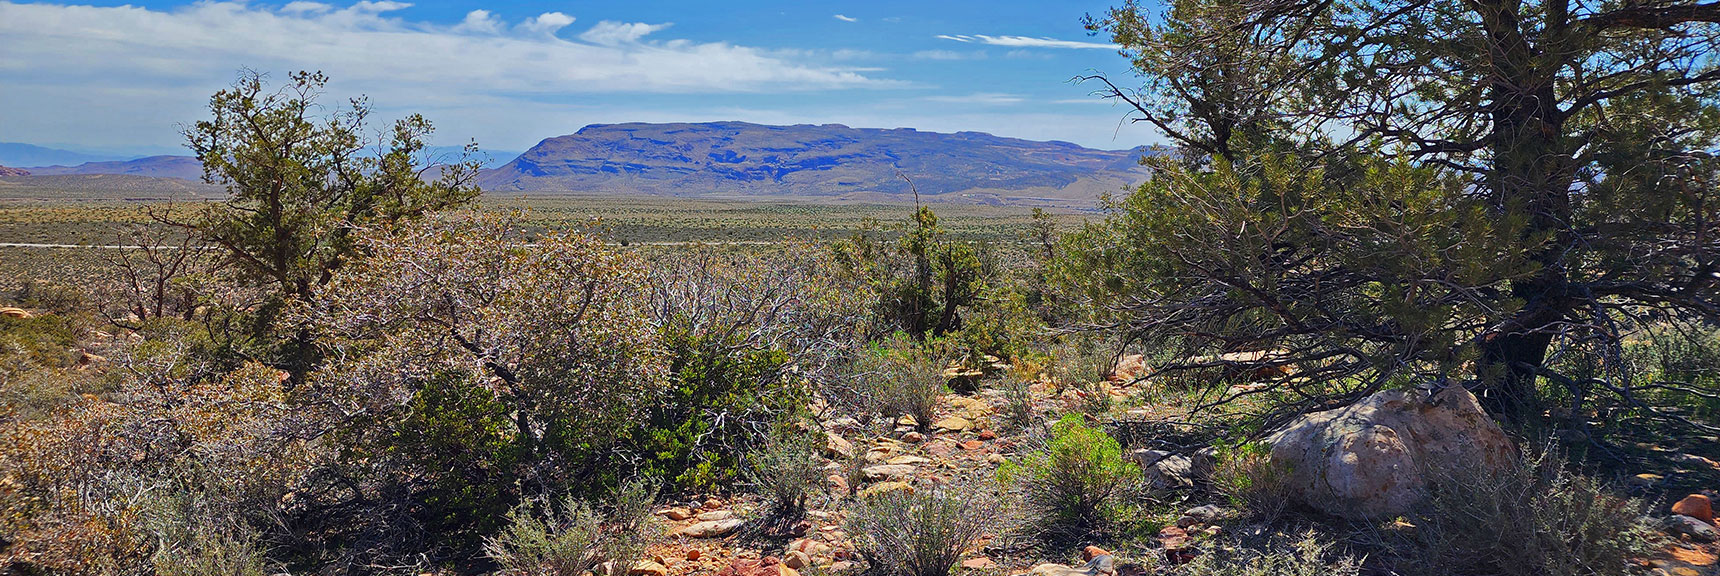 View South to Blue Diamond Hill | Dales Trail | Red Rock Canyon National Conservation Area, Nevada | David Smith | LasVegasAreaTrails.com